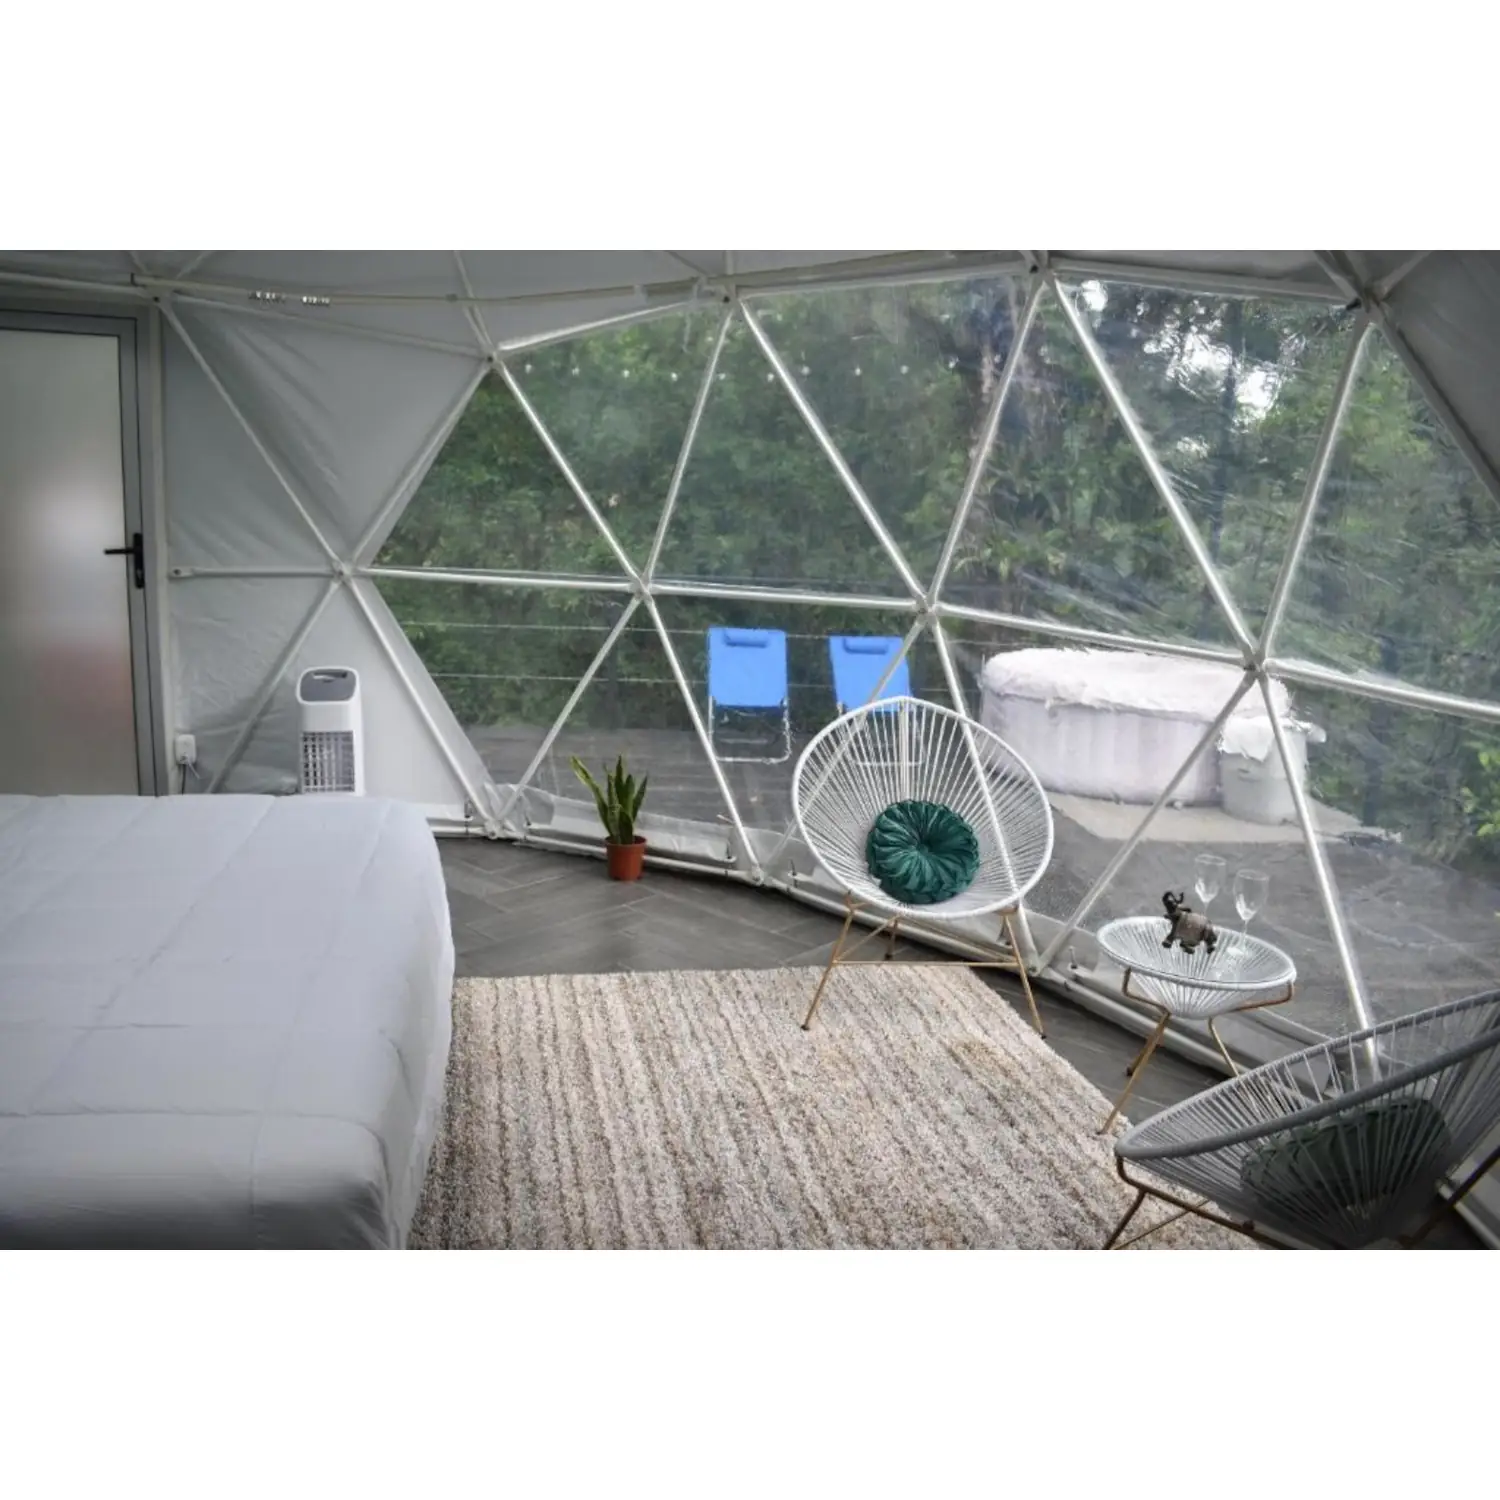 6m-glamping-dome-in-budget (15)